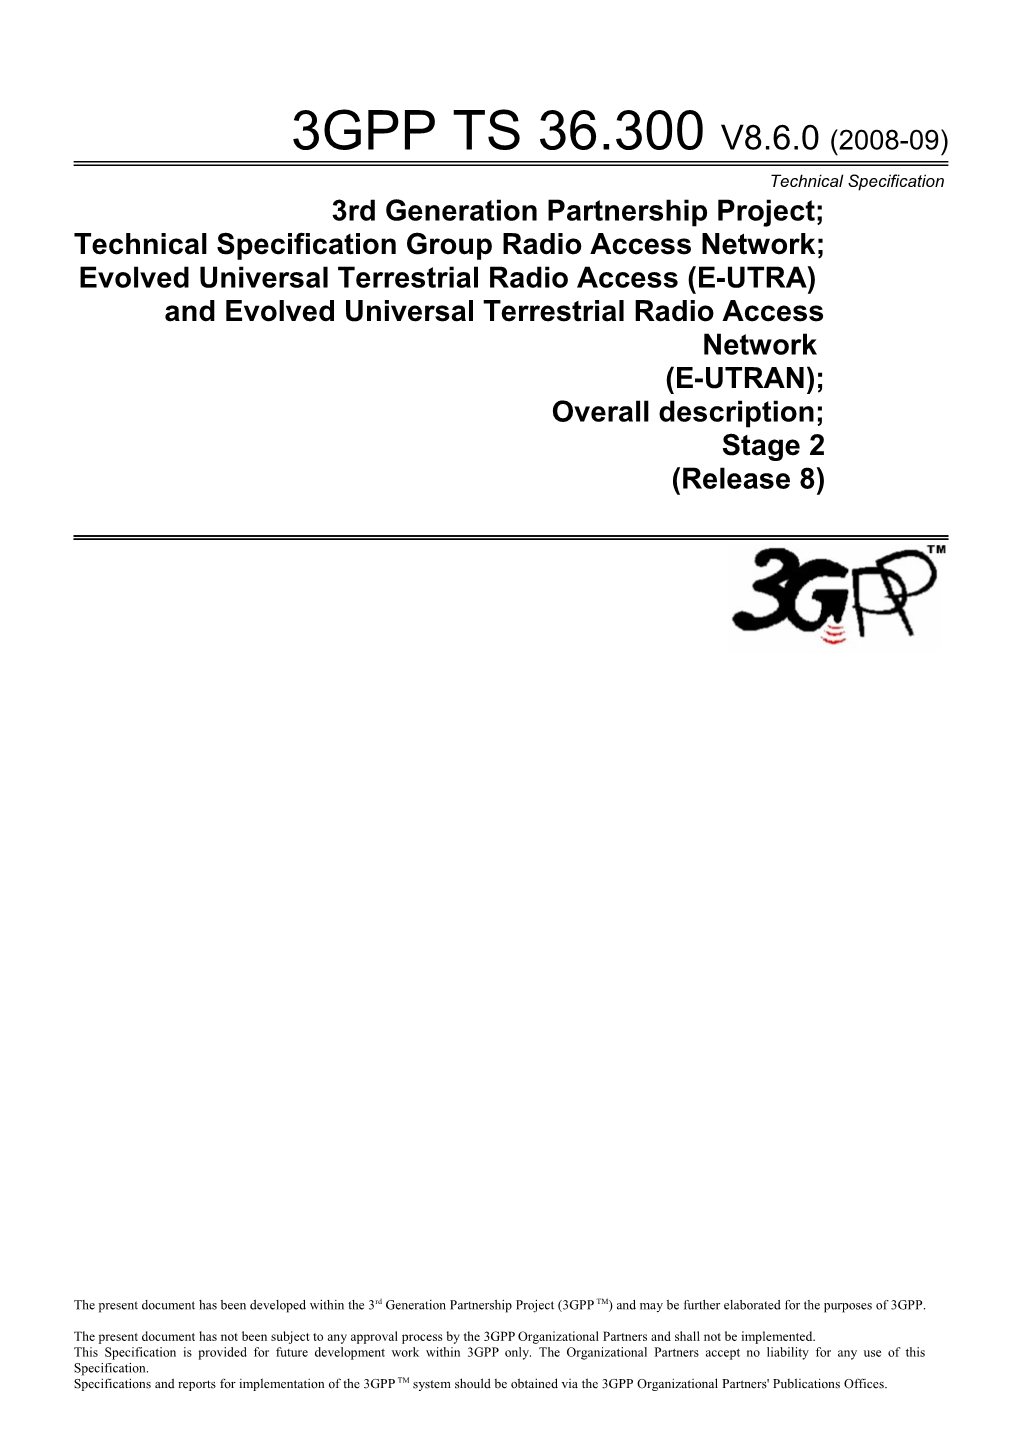 Technical Specification Group Radio Access Network;